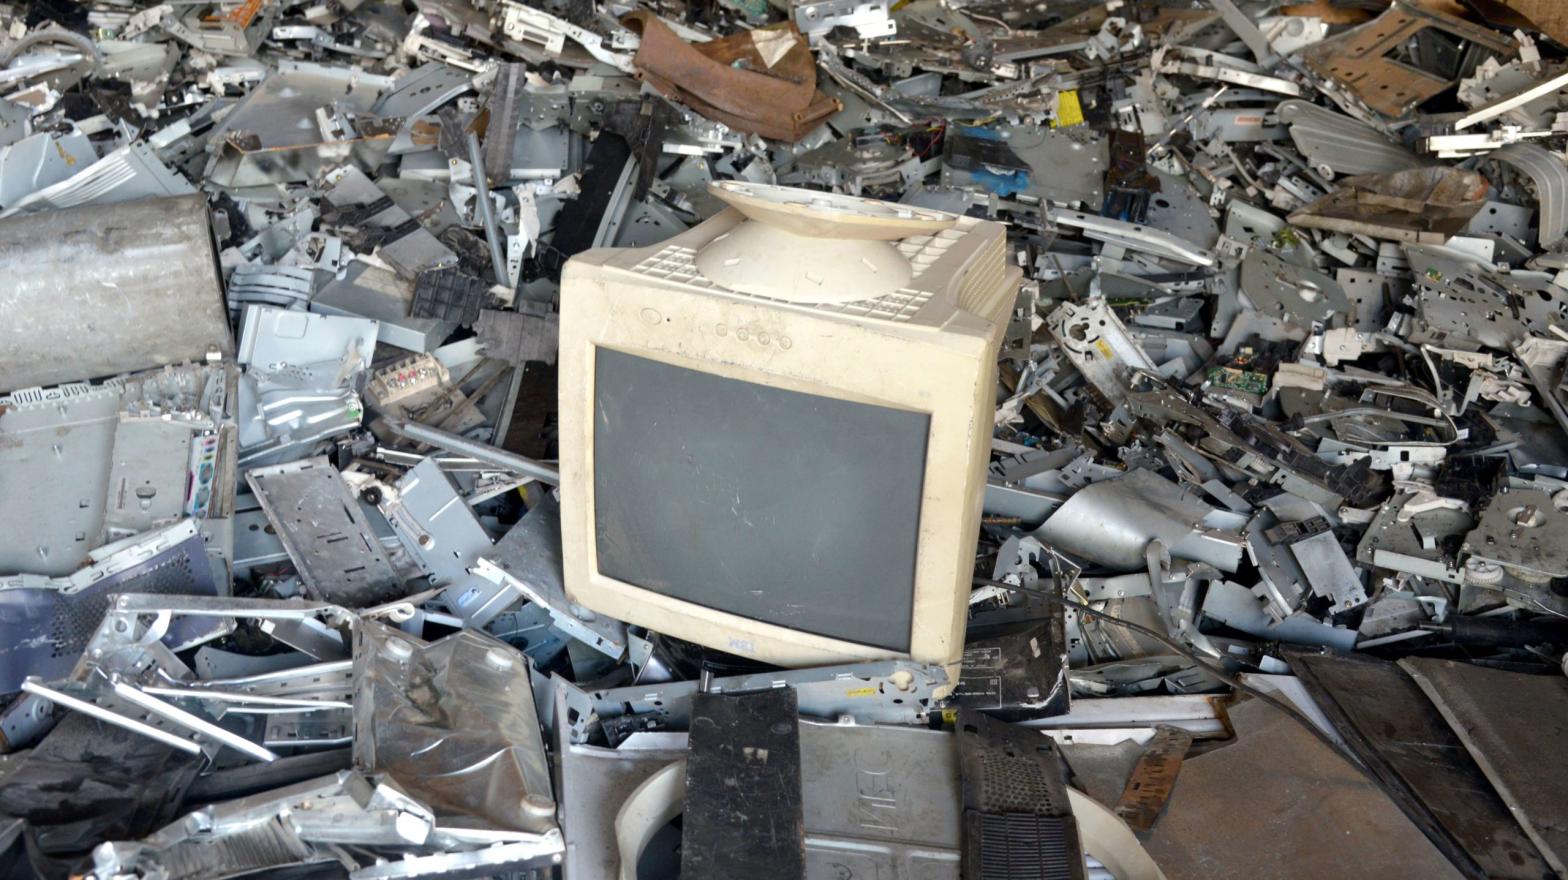 A pile of scrap metal at a breakage yard where old electrical and electronic items are sold in a district of Abidjan, Côte d'Ivoire. (Photo: Issouf Sanogo/AFP, Getty Images)